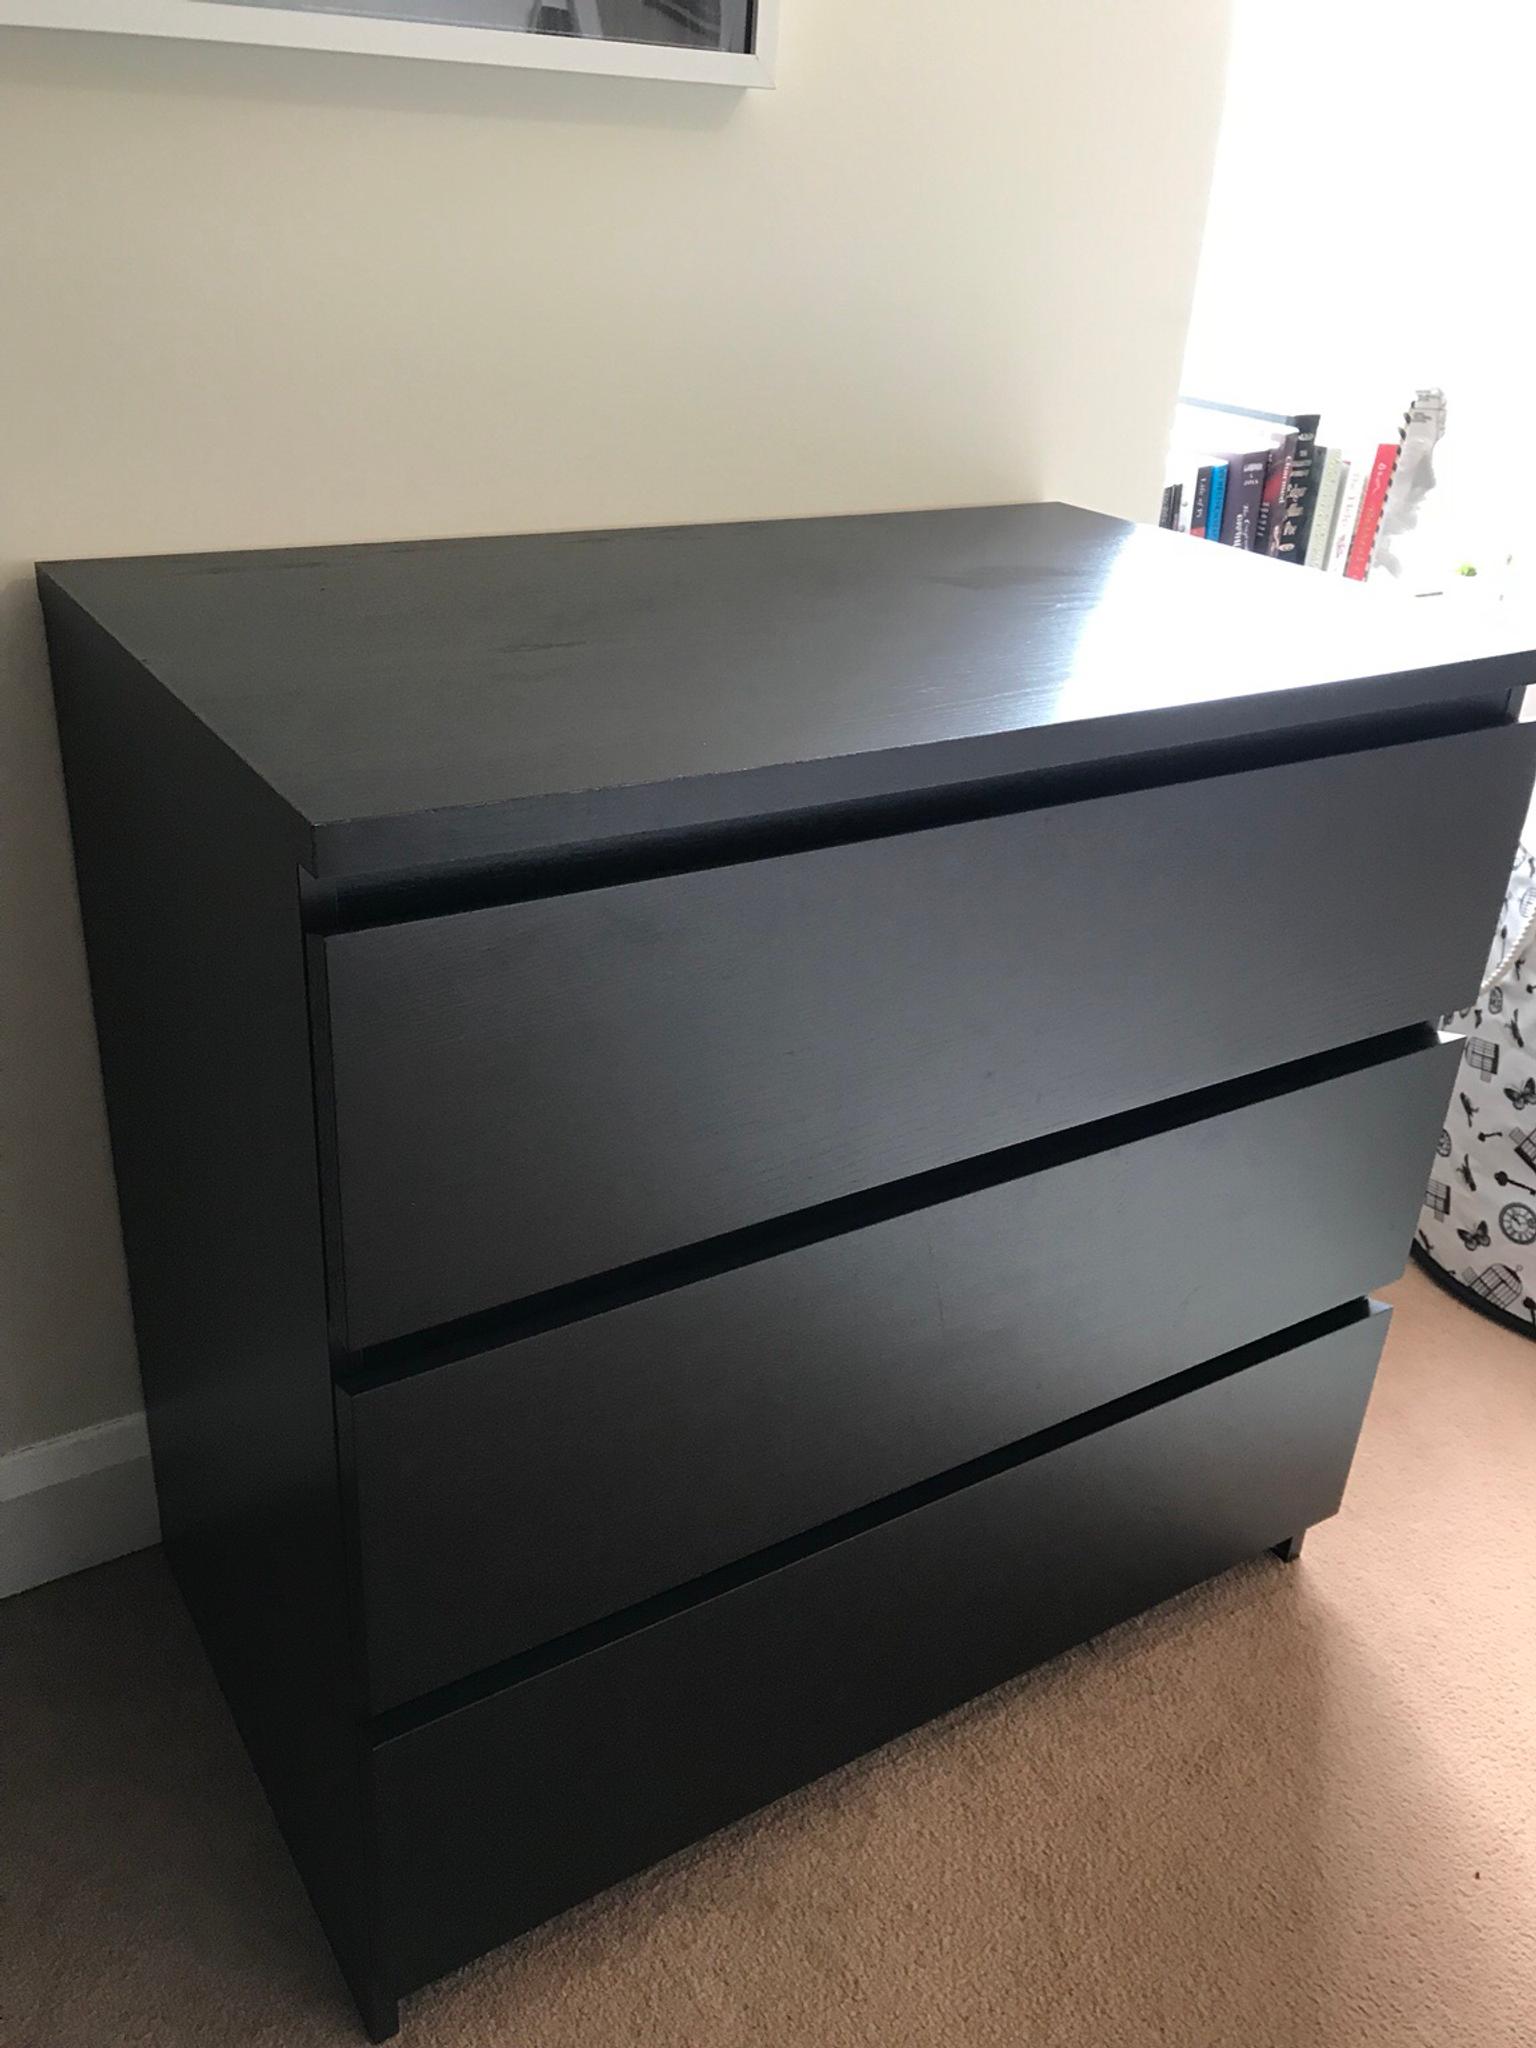 Ikea Malm 3 Drawer Chest In St15 Stone For 25 00 For Sale Shpock